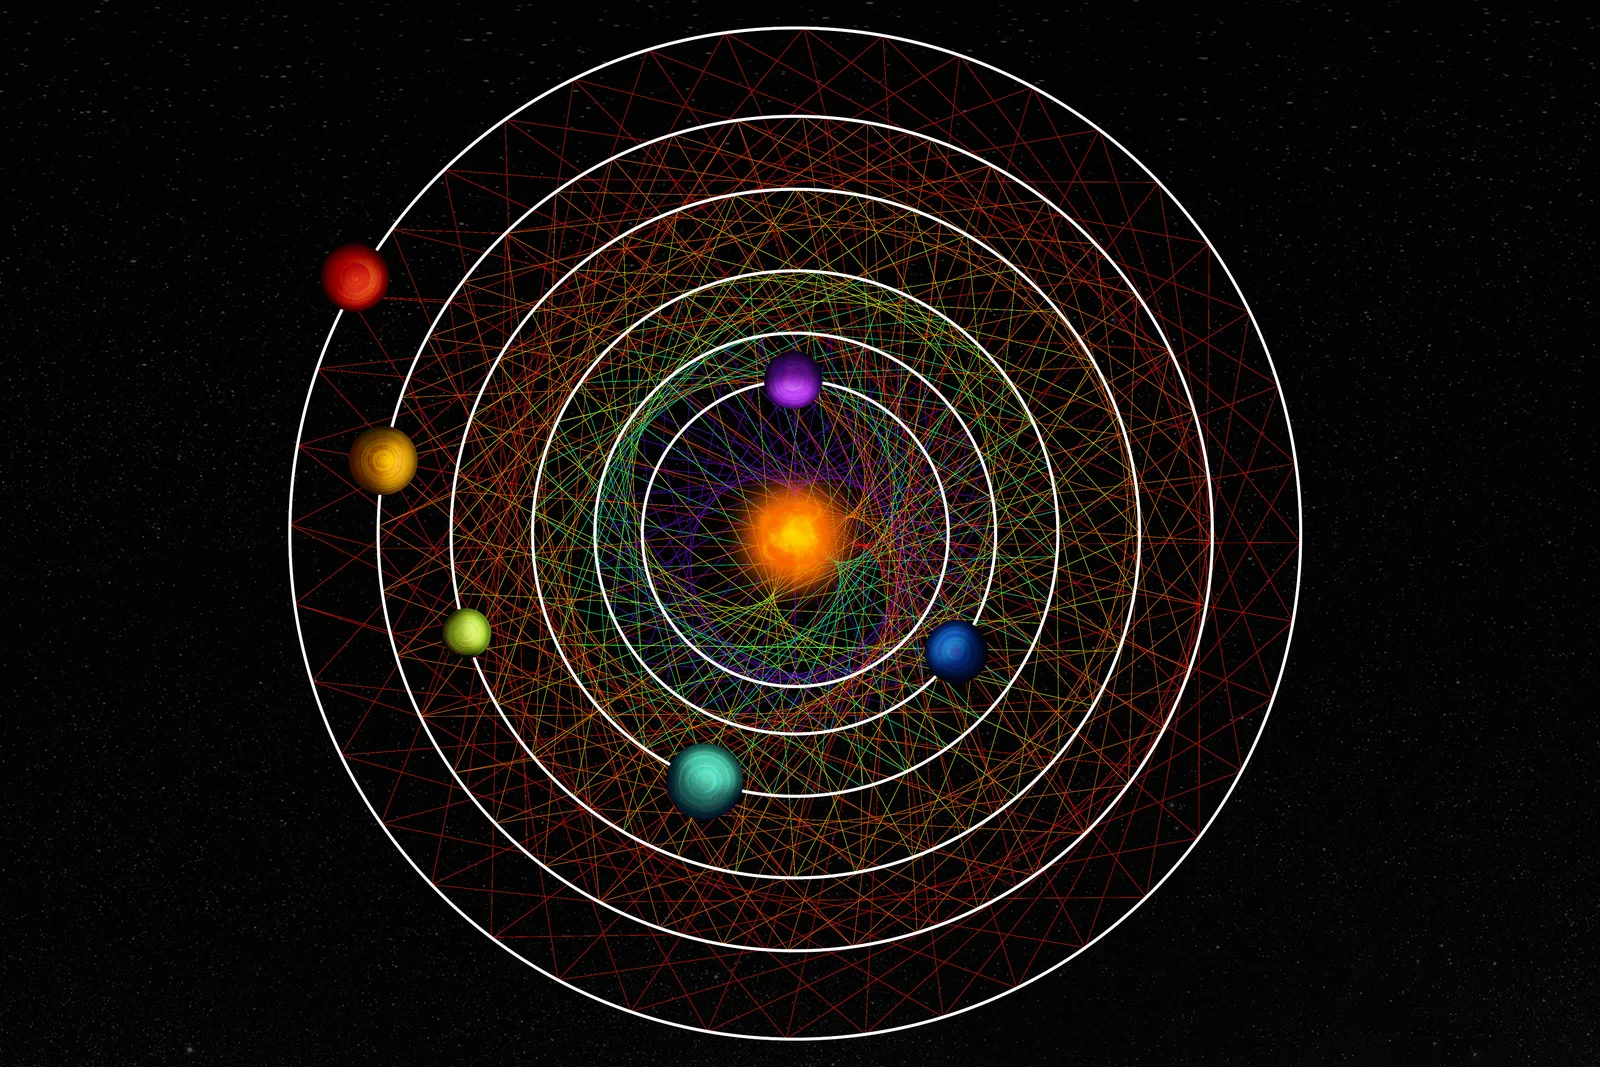 Orbiting Solar System - Science And Nature